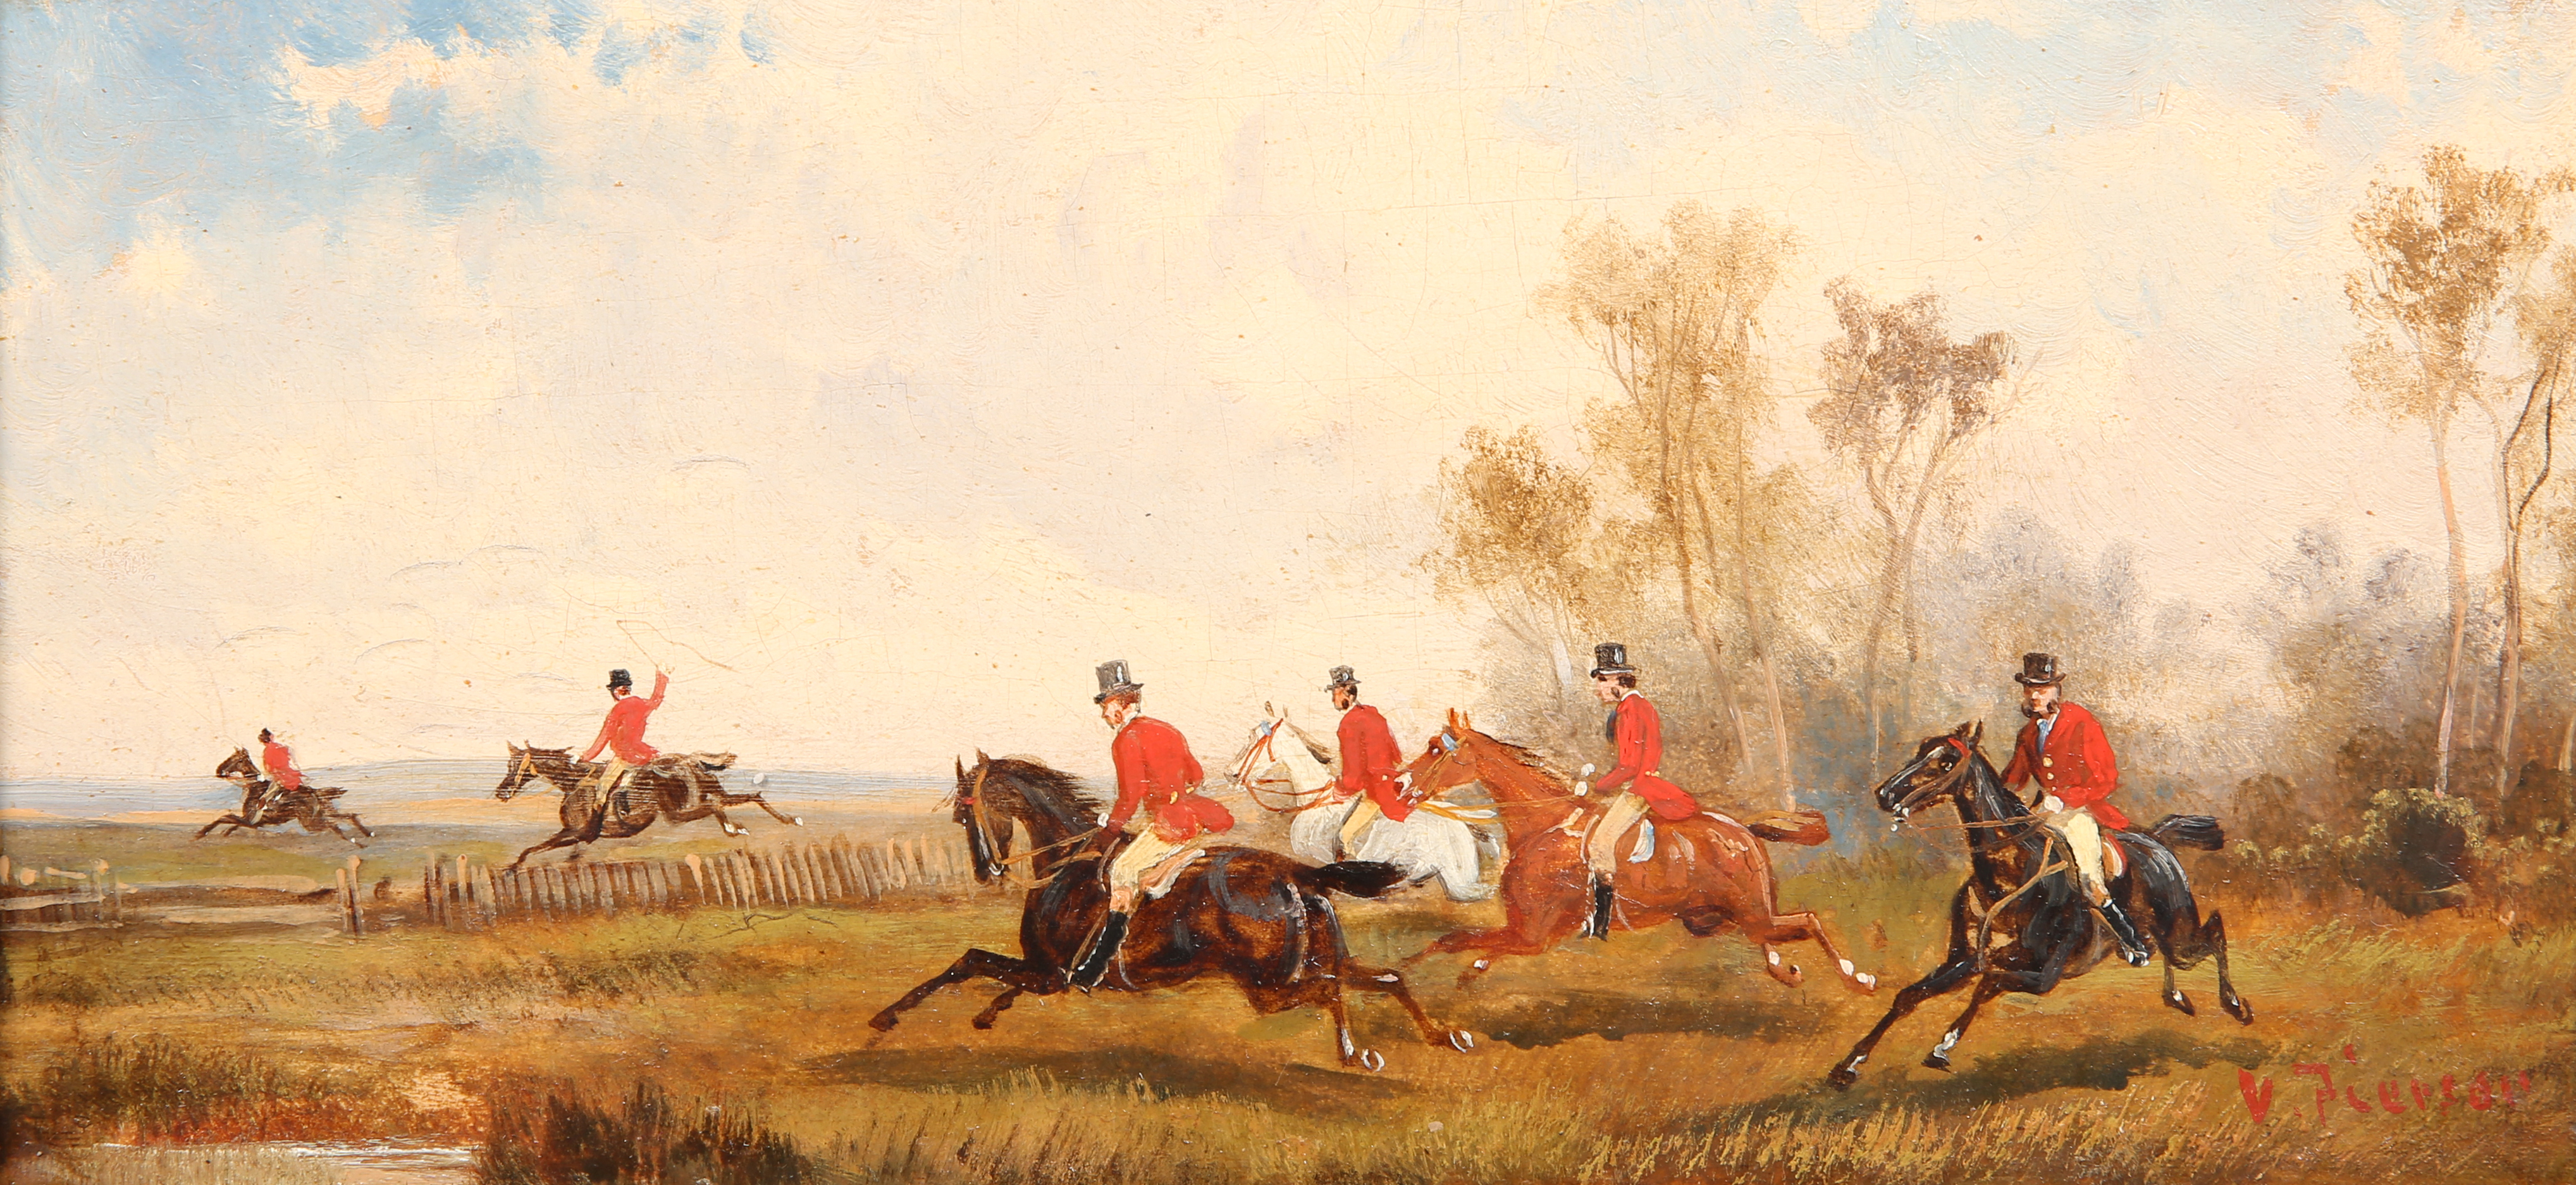 VICTOR PIERSON, FOX HUNTING SCENES, A PAIR - Image 2 of 2